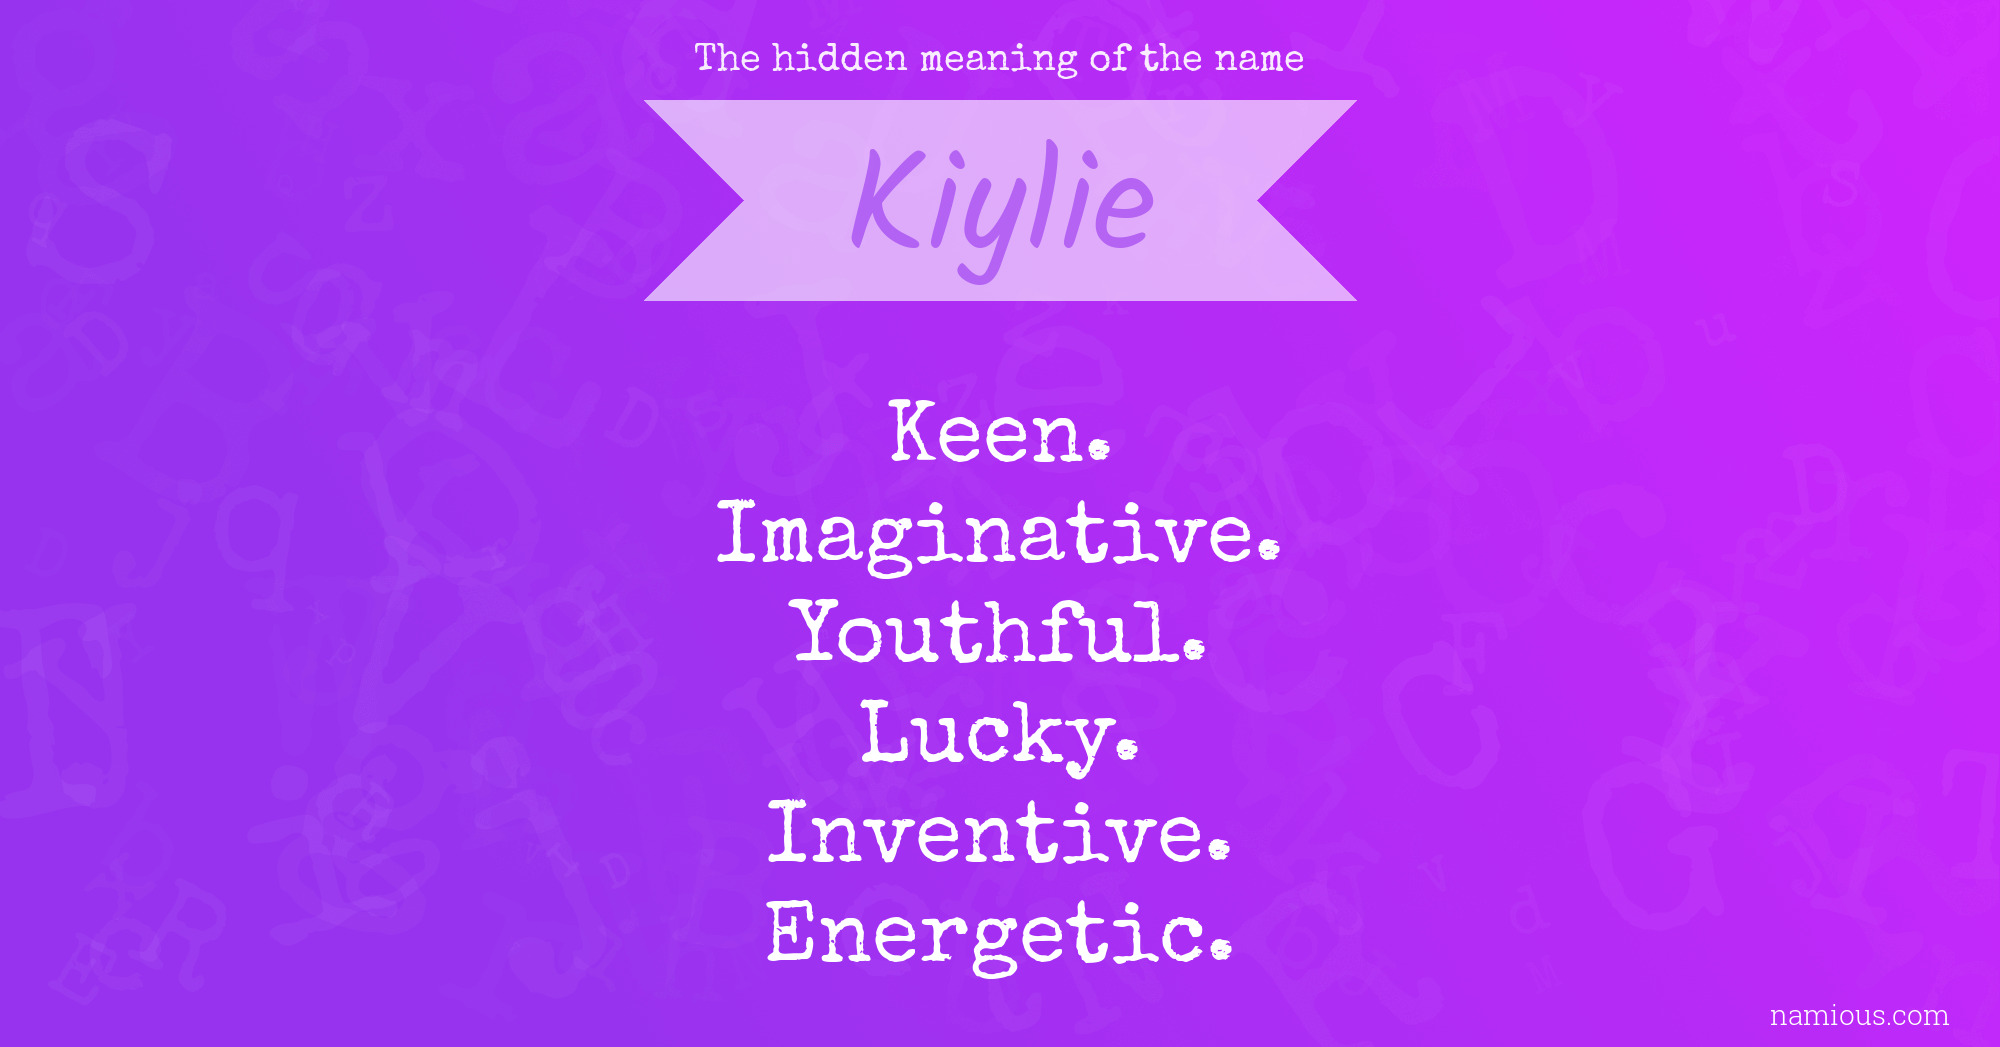 The hidden meaning of the name Kiylie